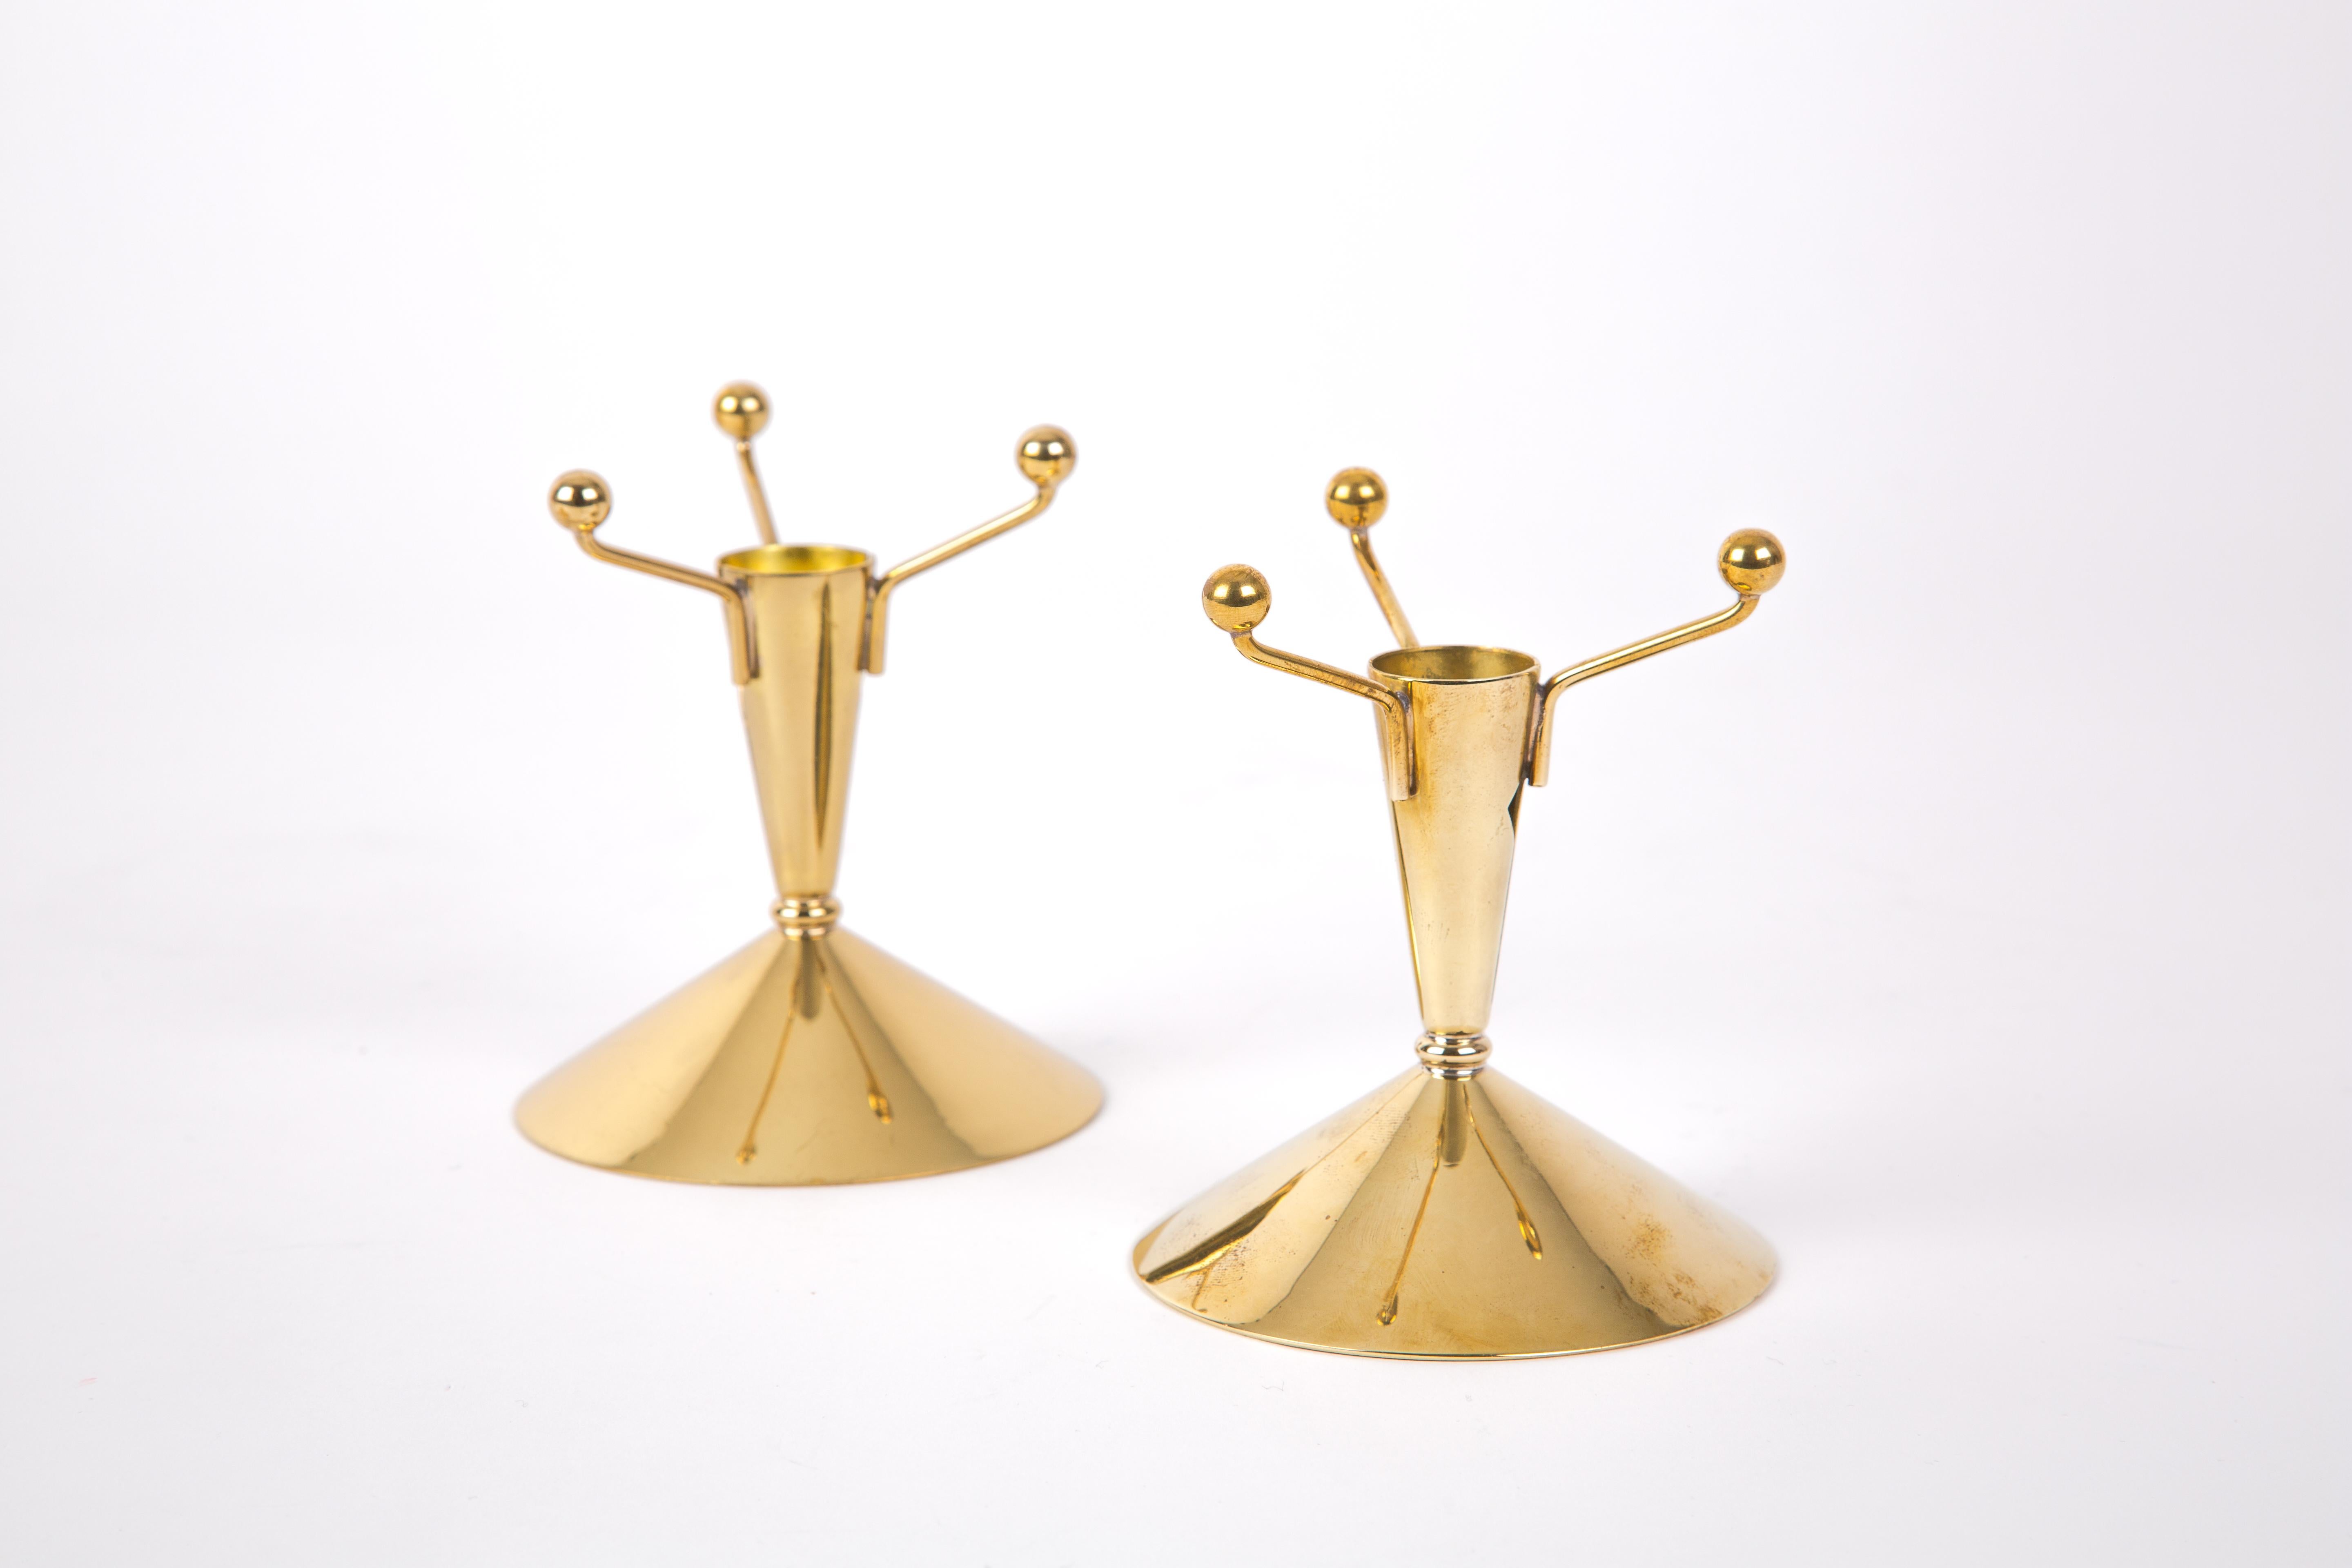 Two brass Ystad Metall candleholders. A set of two brass Ystad Metall candleholders, marked with 